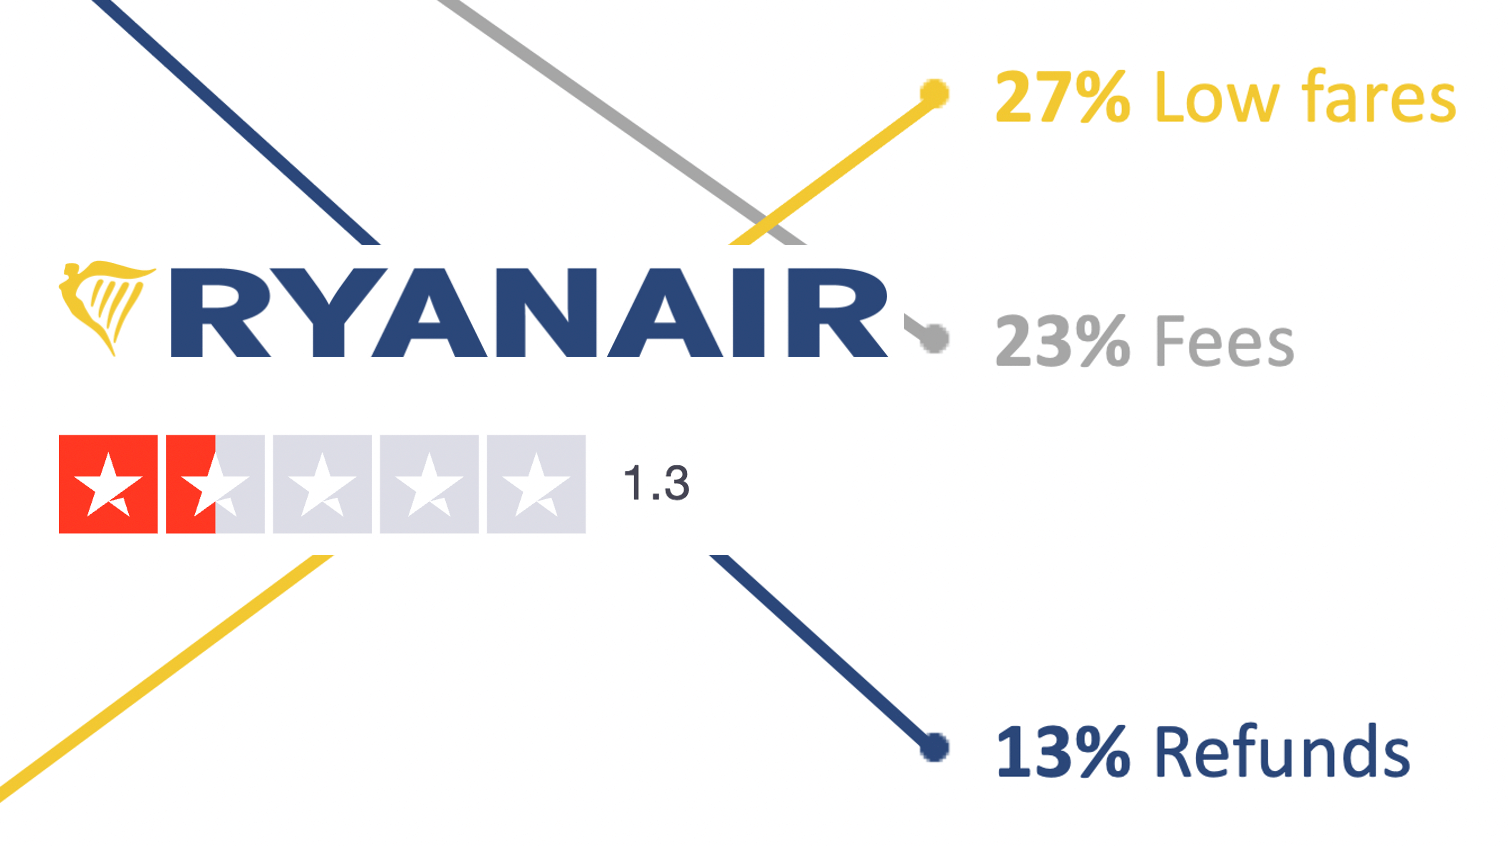 Ryanair - a Love-hate Relationship